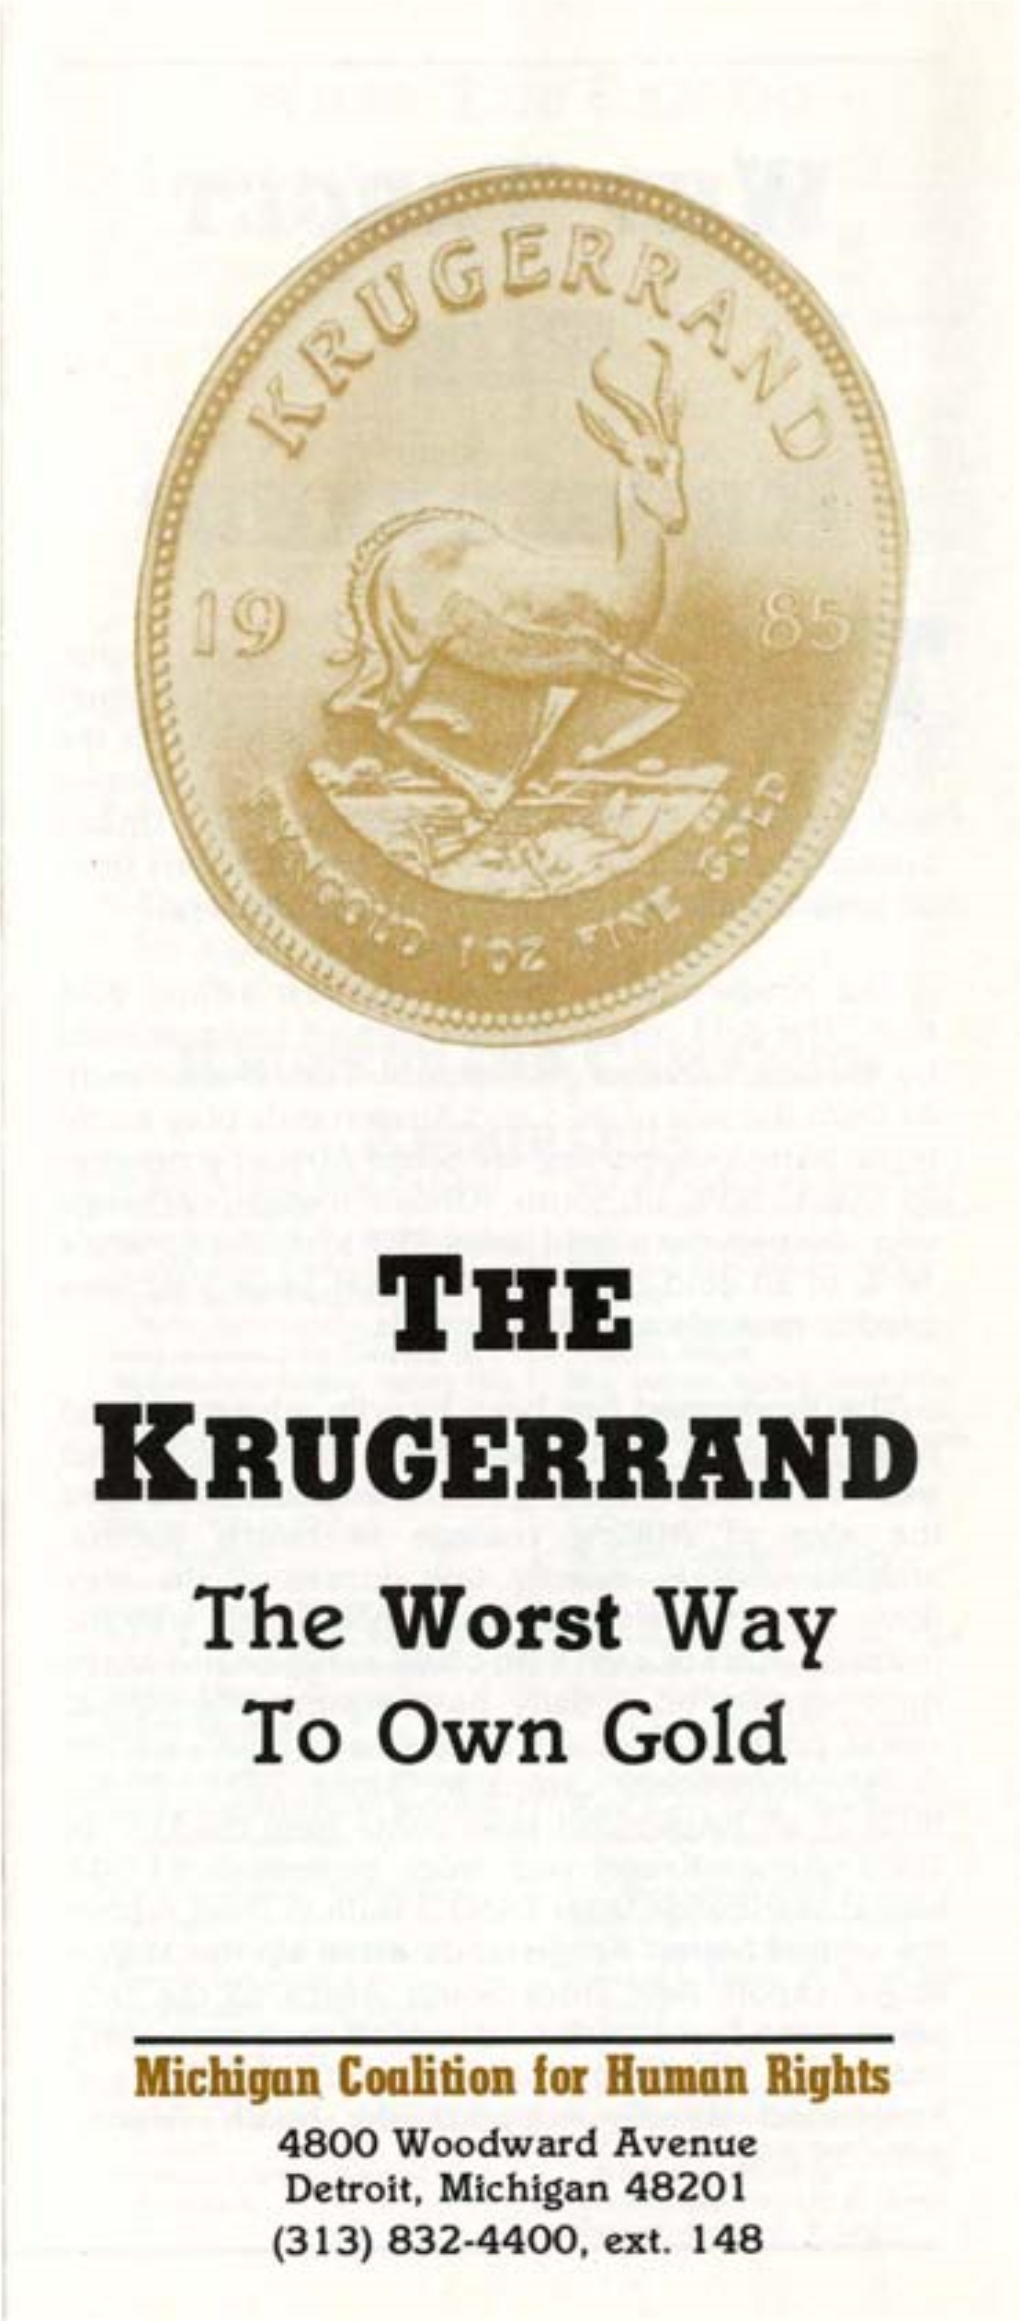 KRUGERRAND the Worst Way to Own Gold